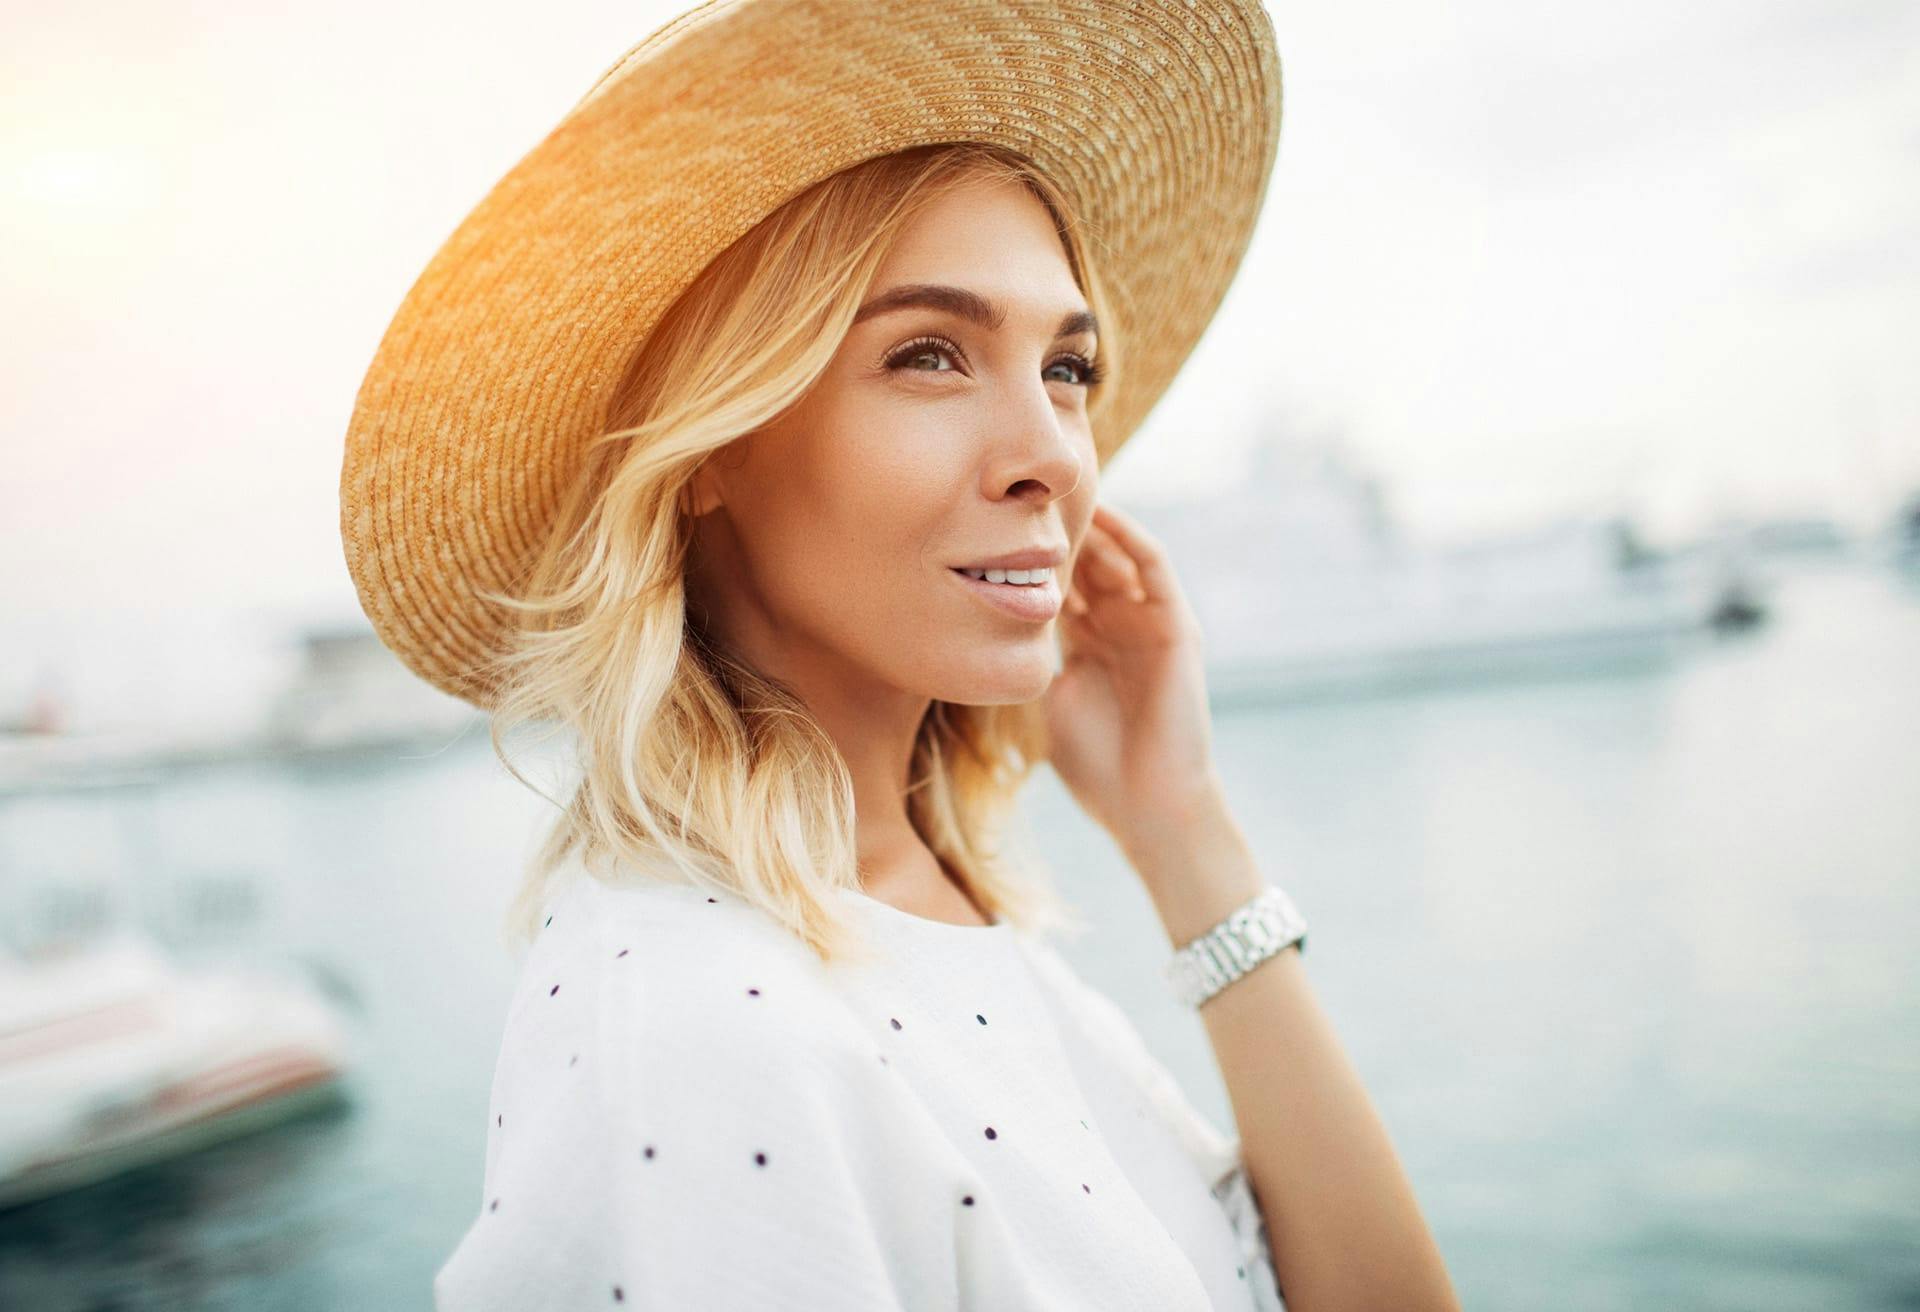 Woman in a sunhat and white top